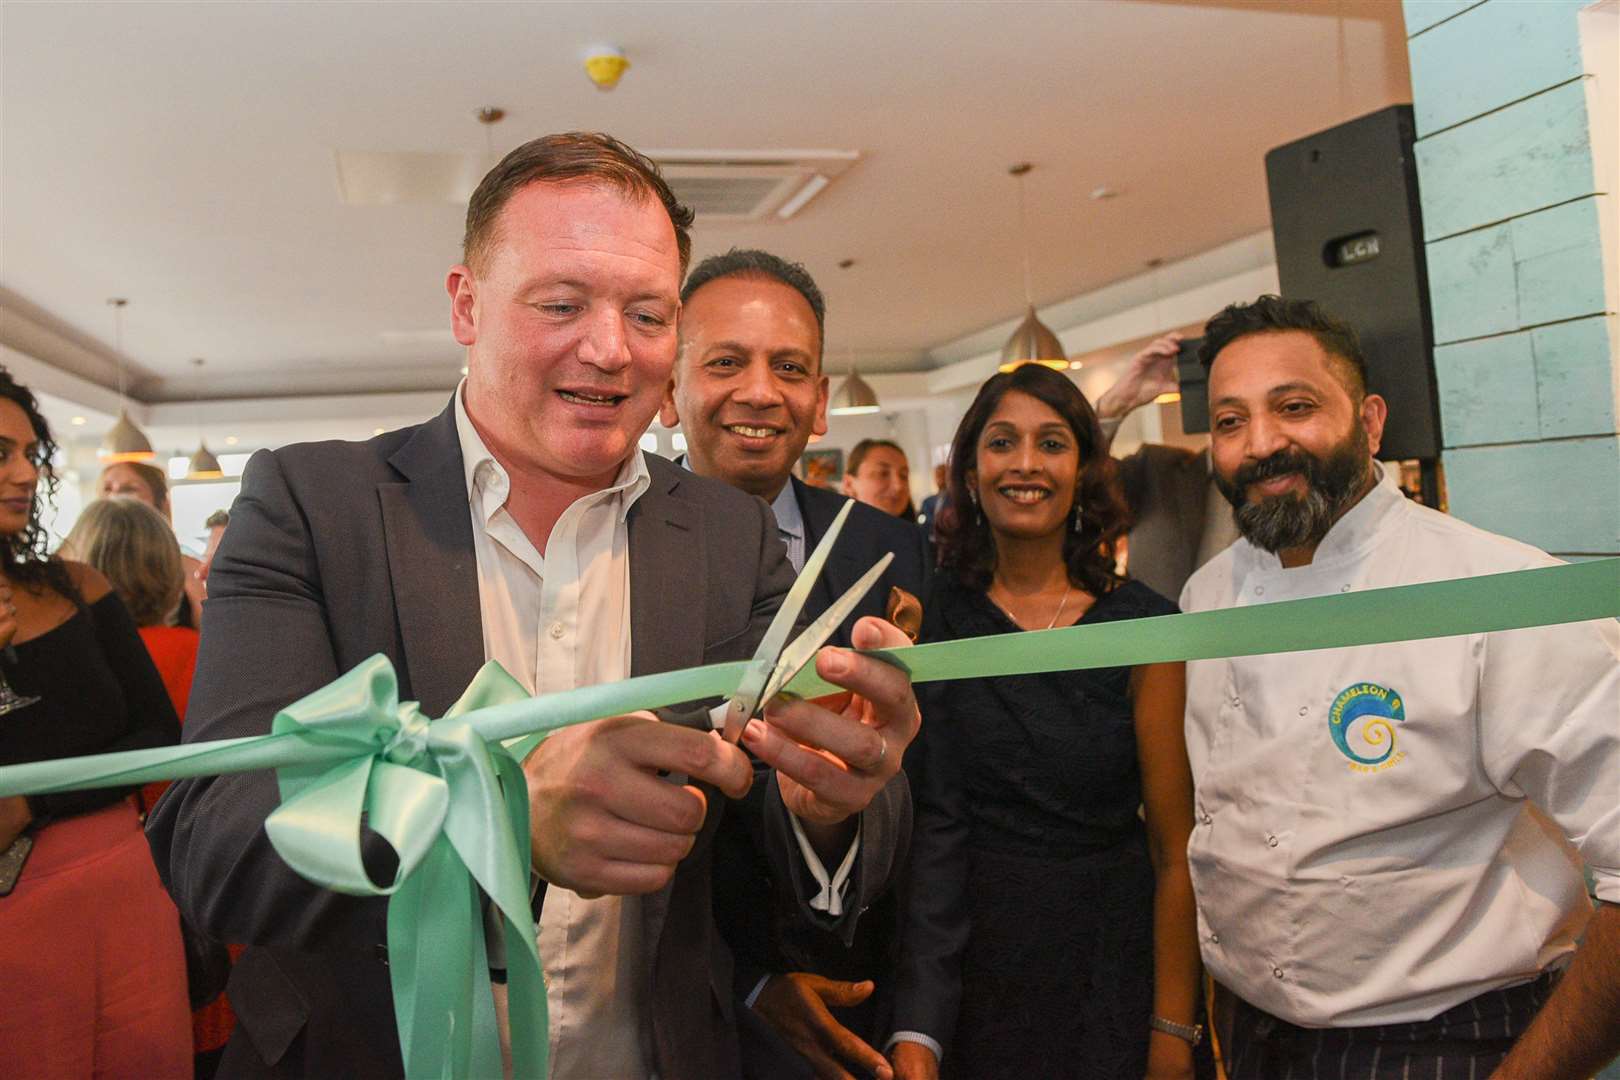 MP Damian Collins cuts the ribbon at the official opening